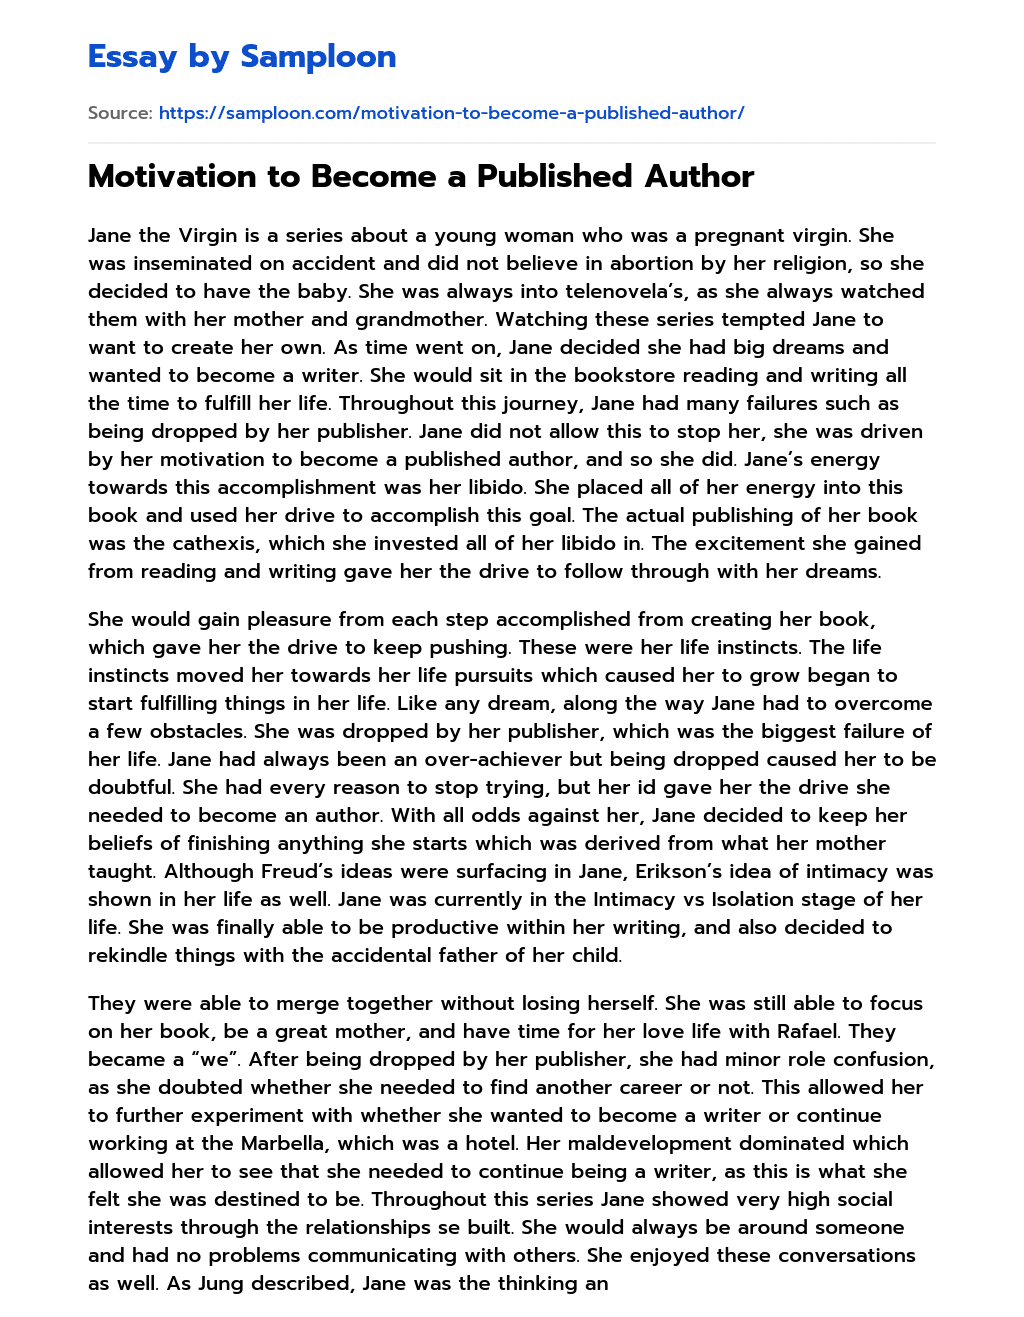 Motivation to Become a Published Author essay